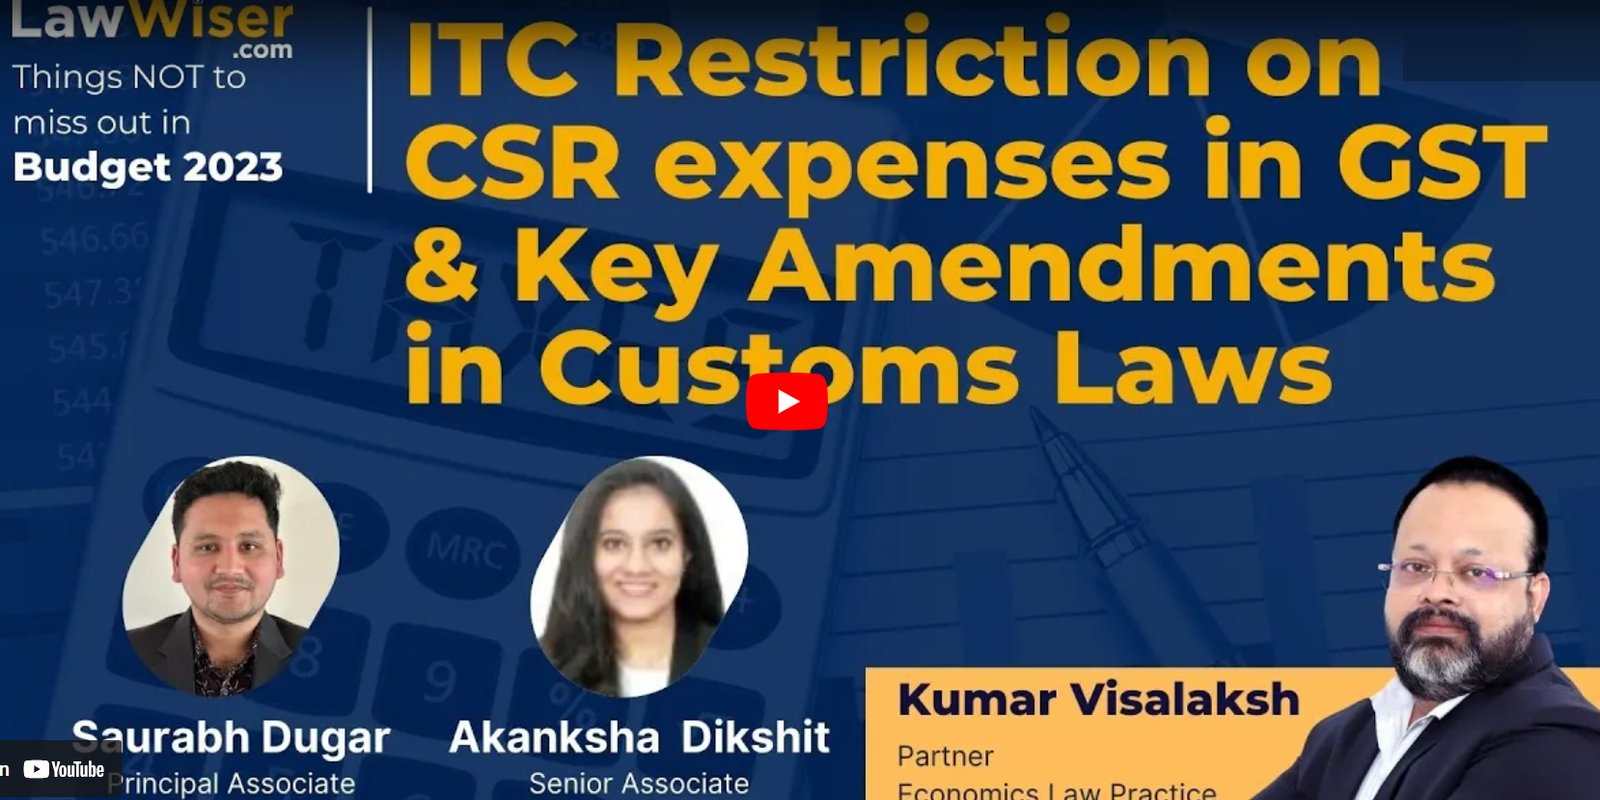 #Budget 2023 | ITC Restriction on CSR expenses in GST & Key Amendments in Customs Laws